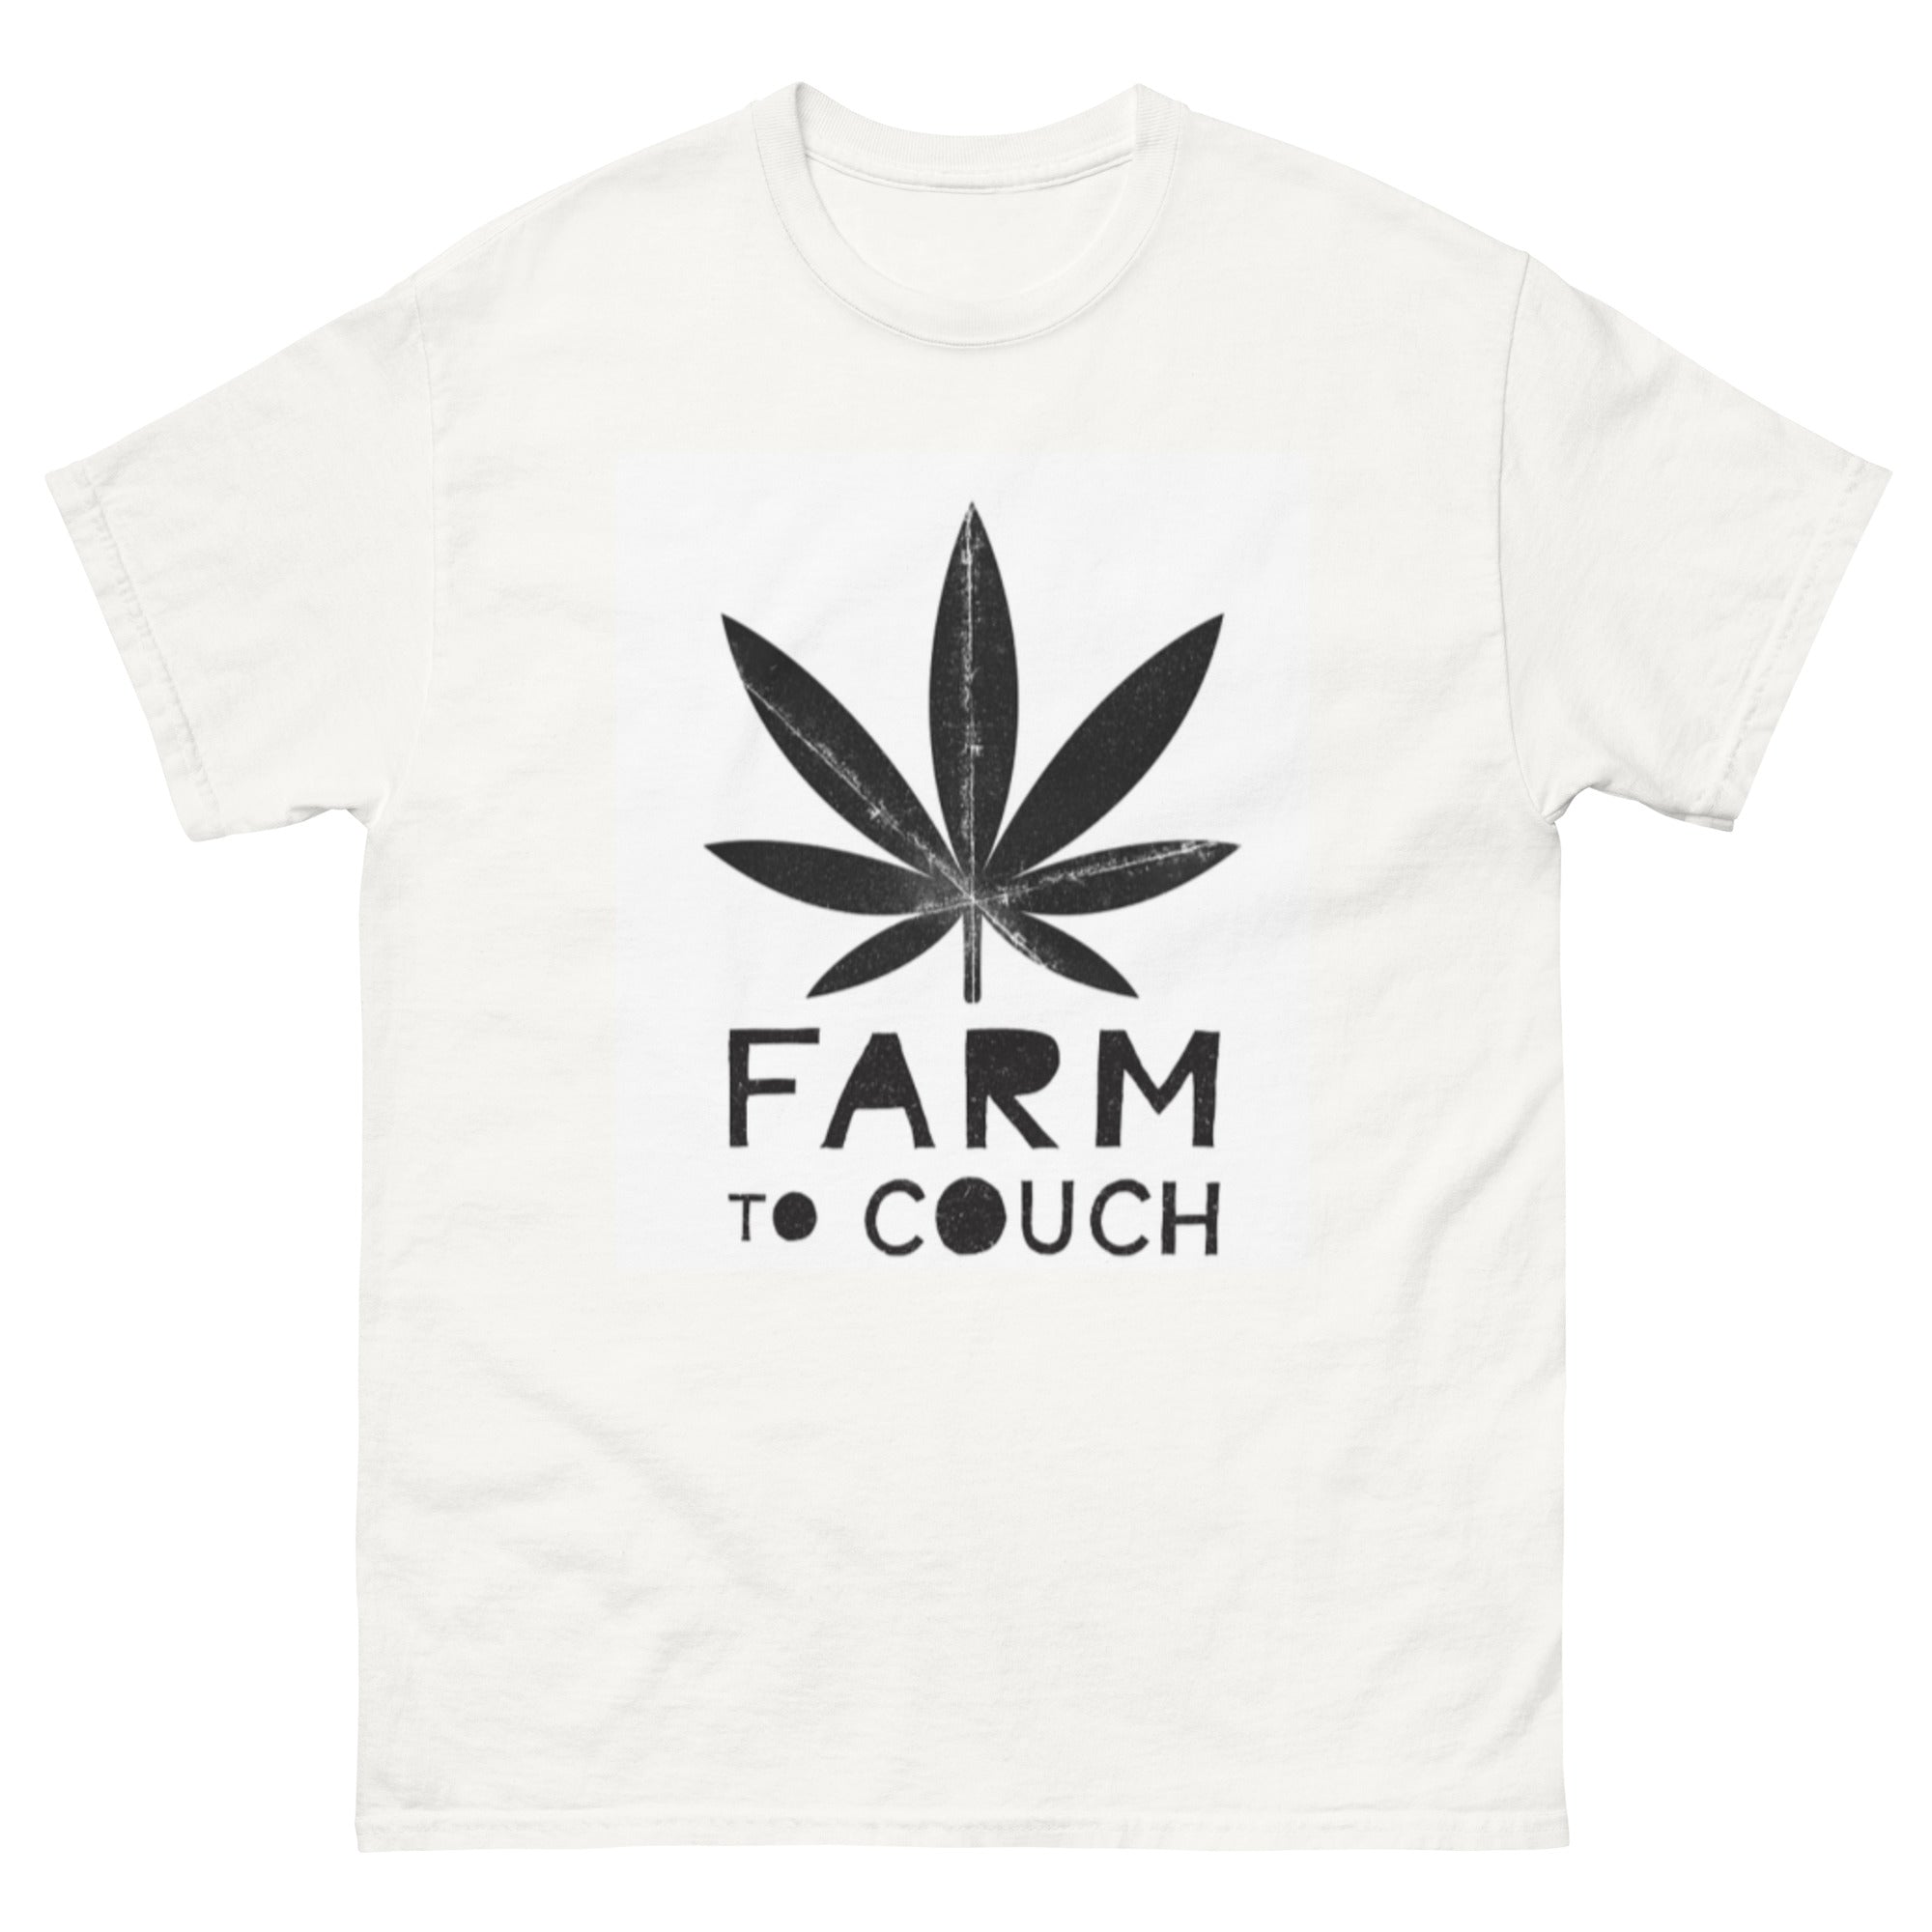 Men's Farm To Couch classic tee